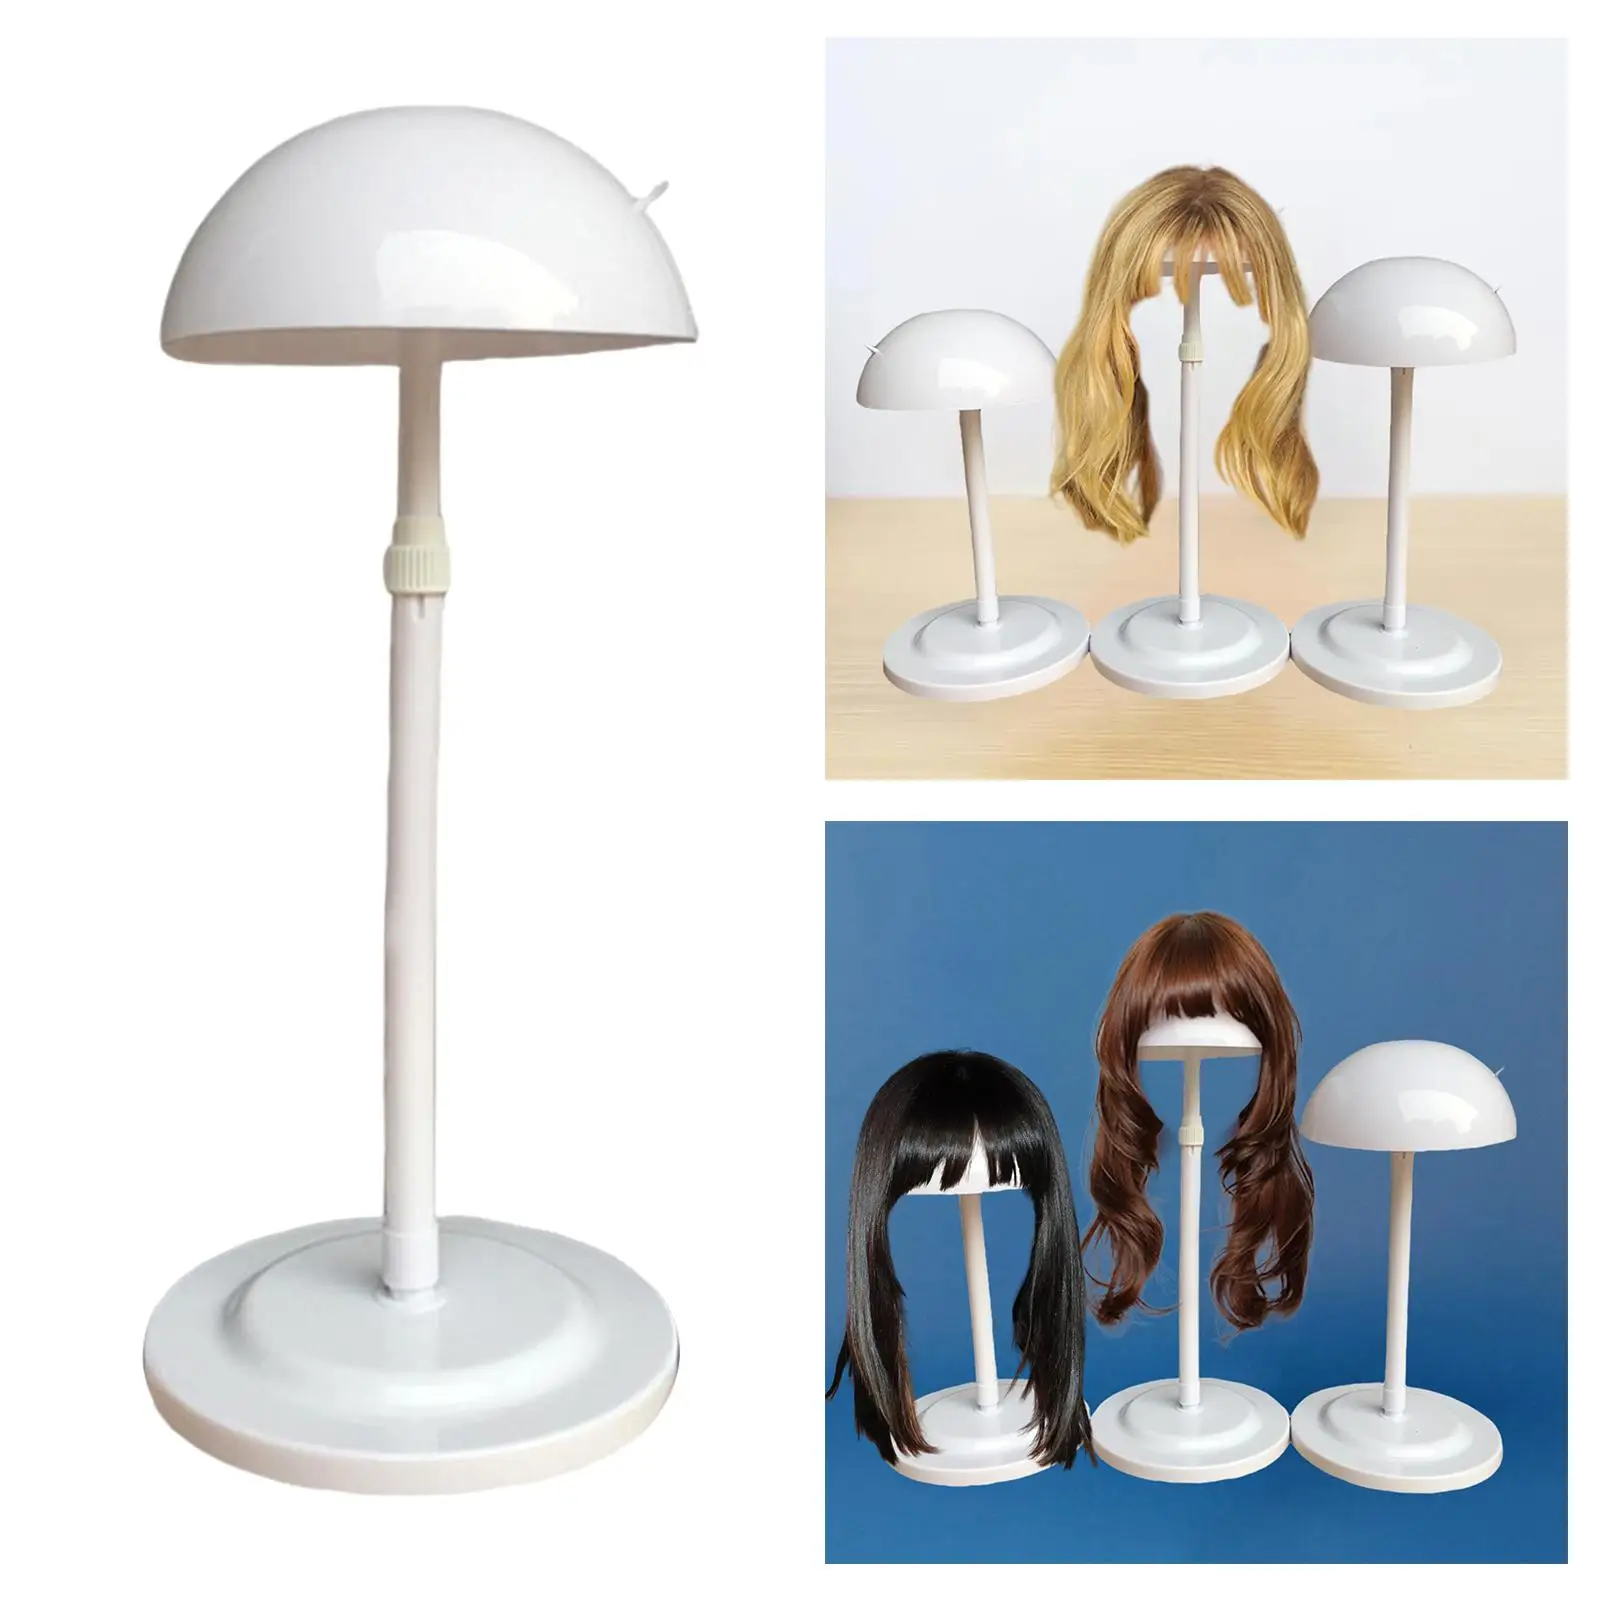 

Wig Stand Stable 25-48cm Adjustable Collapsible Display Holder for Styling